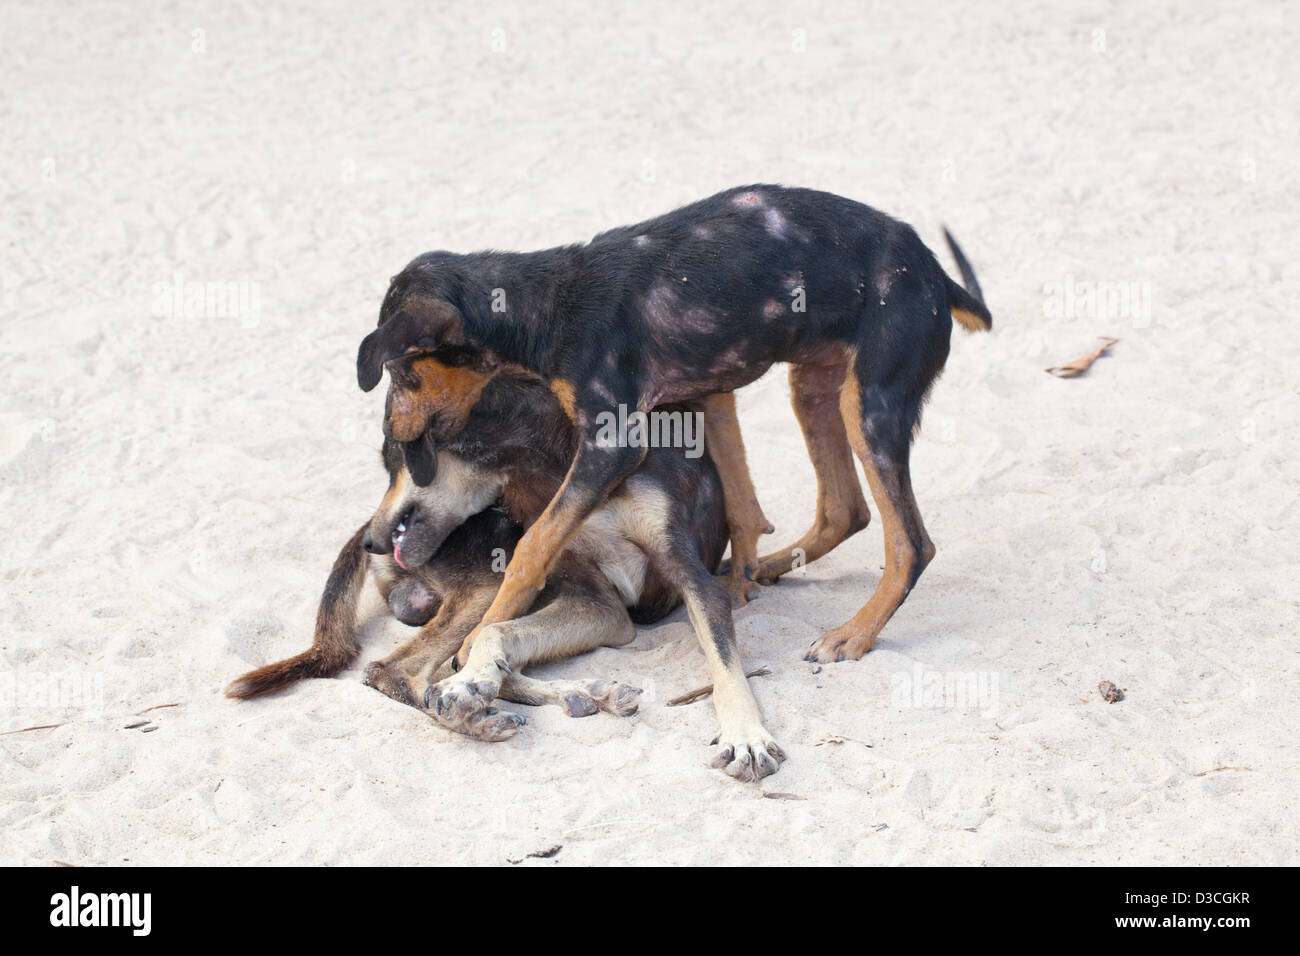 Domestic village 'Bush' Dogs (Canis lupus familiaris). Semi-feral well grown puppies at play. Covered in skin lesions. Stock Photo